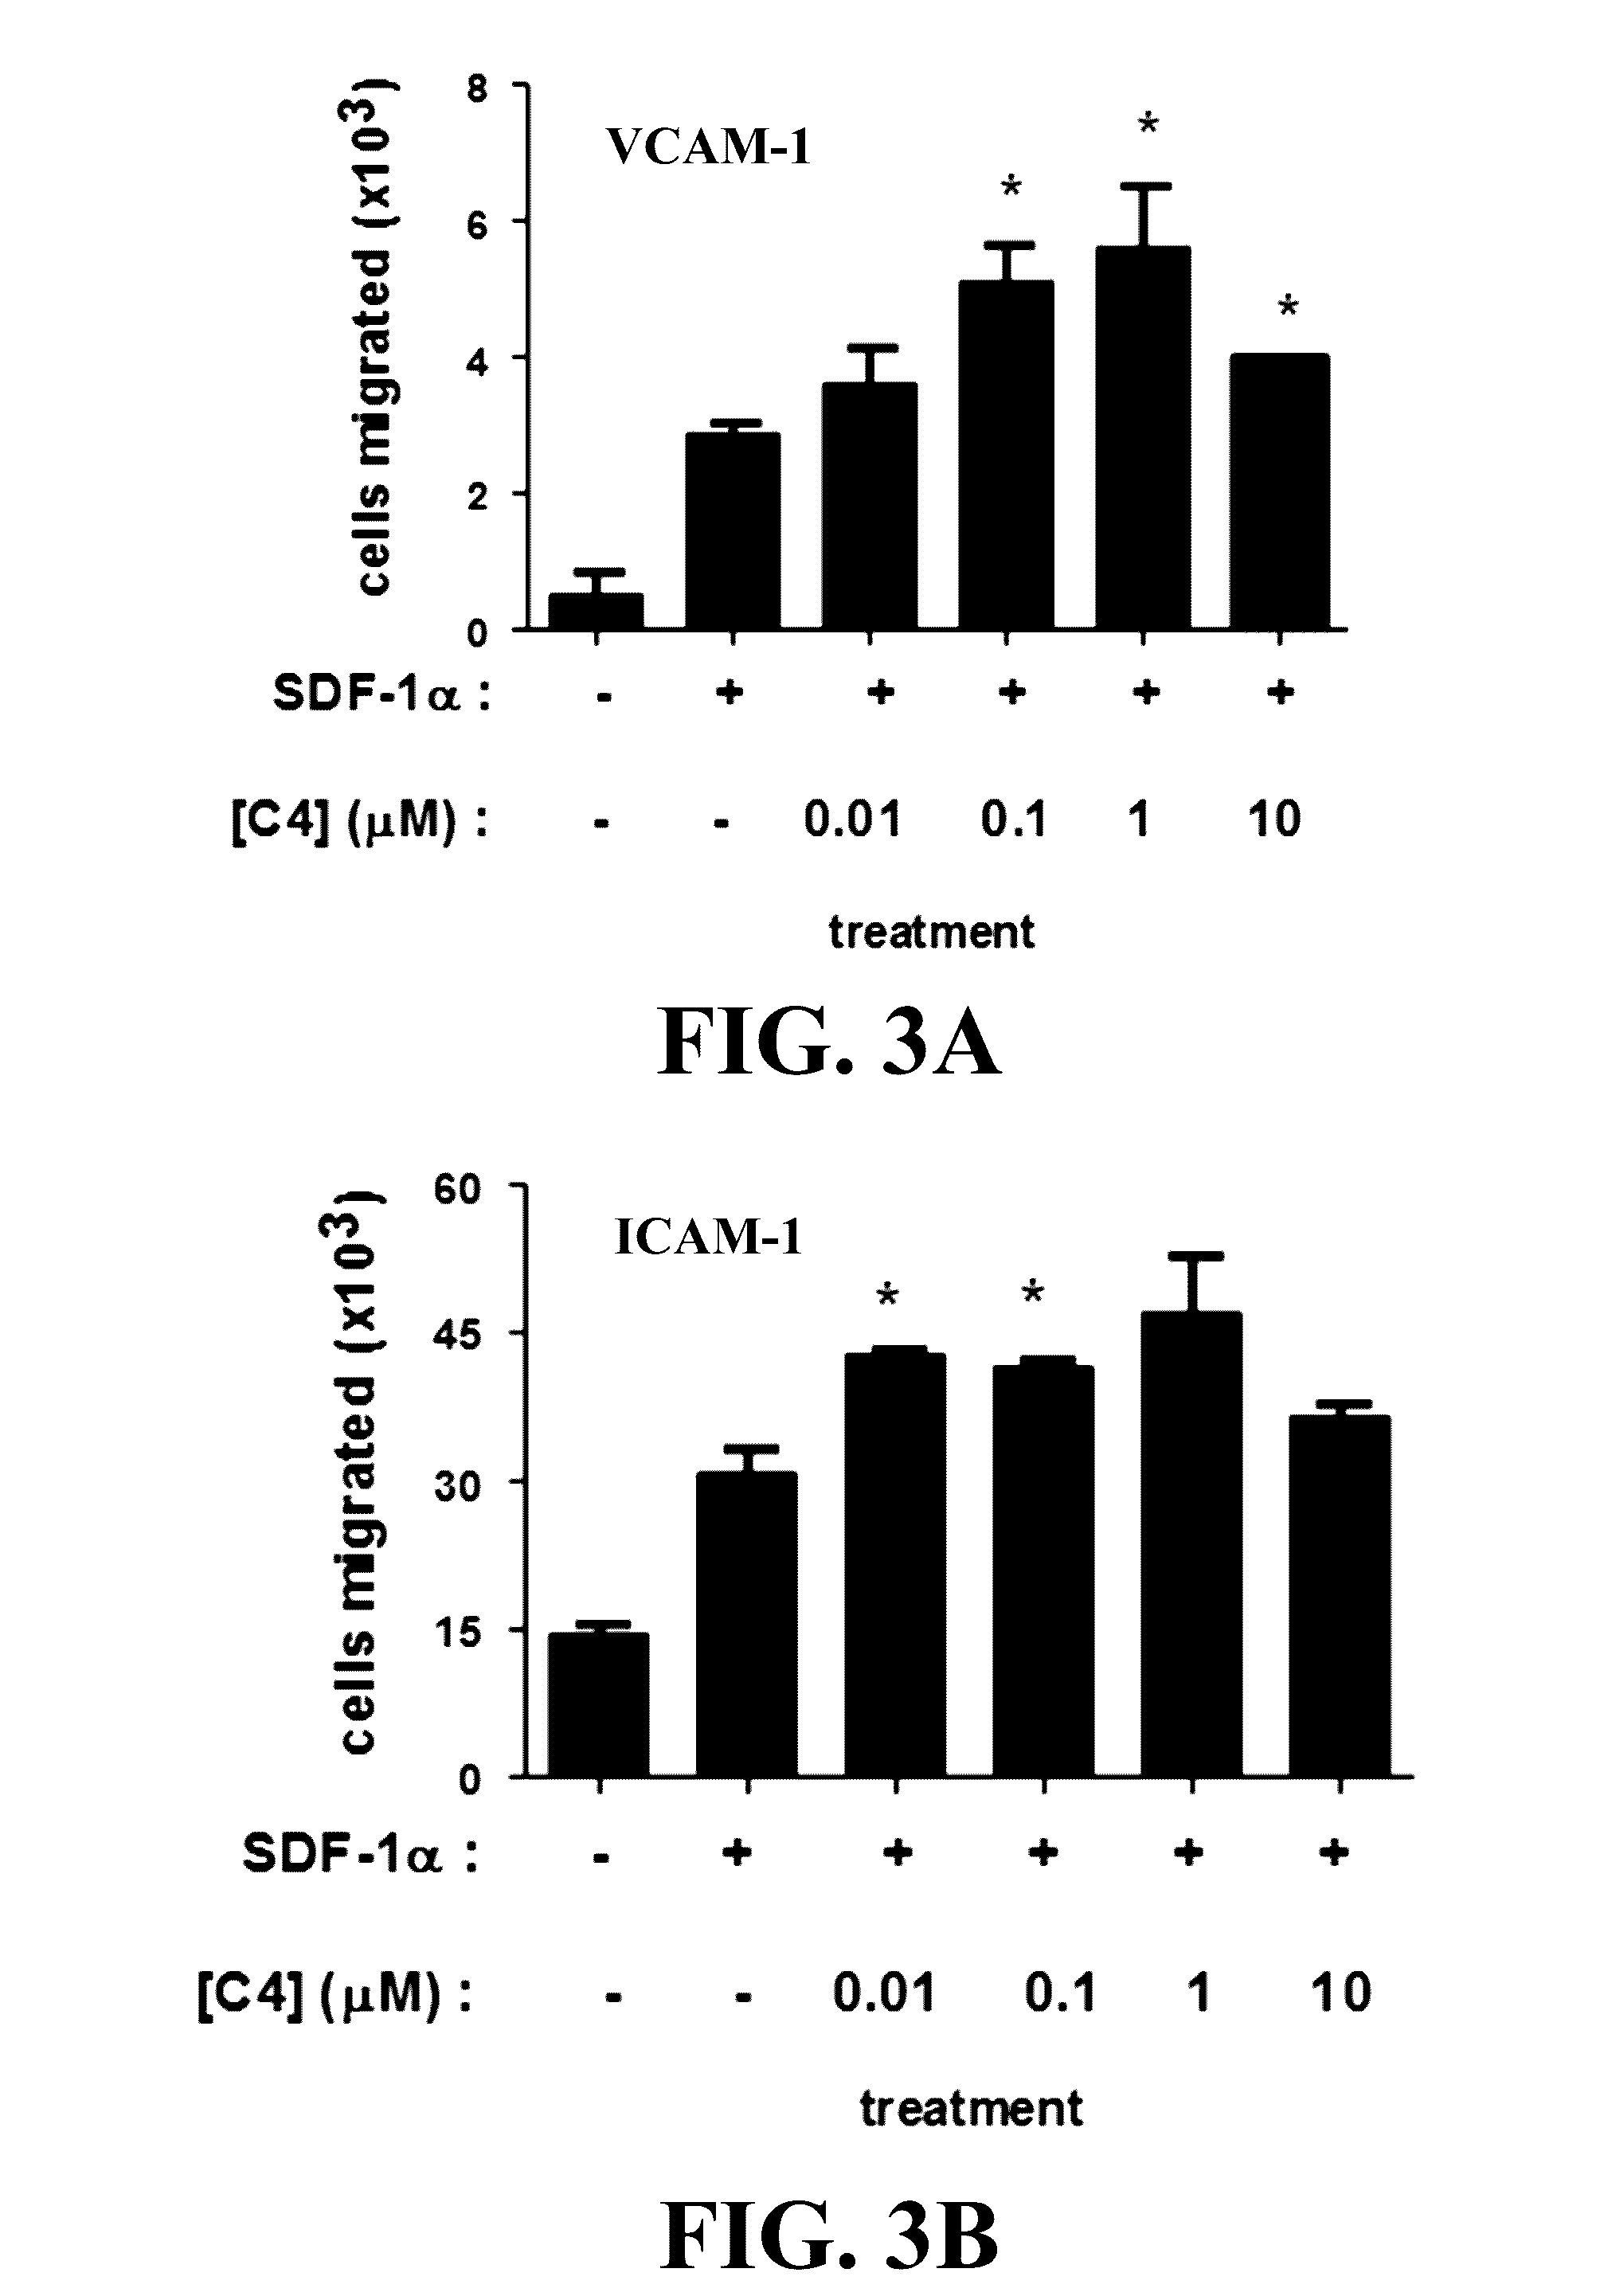 Novel compositions and methods for immunotherapies comprising small molecule integrin receptor-ligand agonist adjuvants